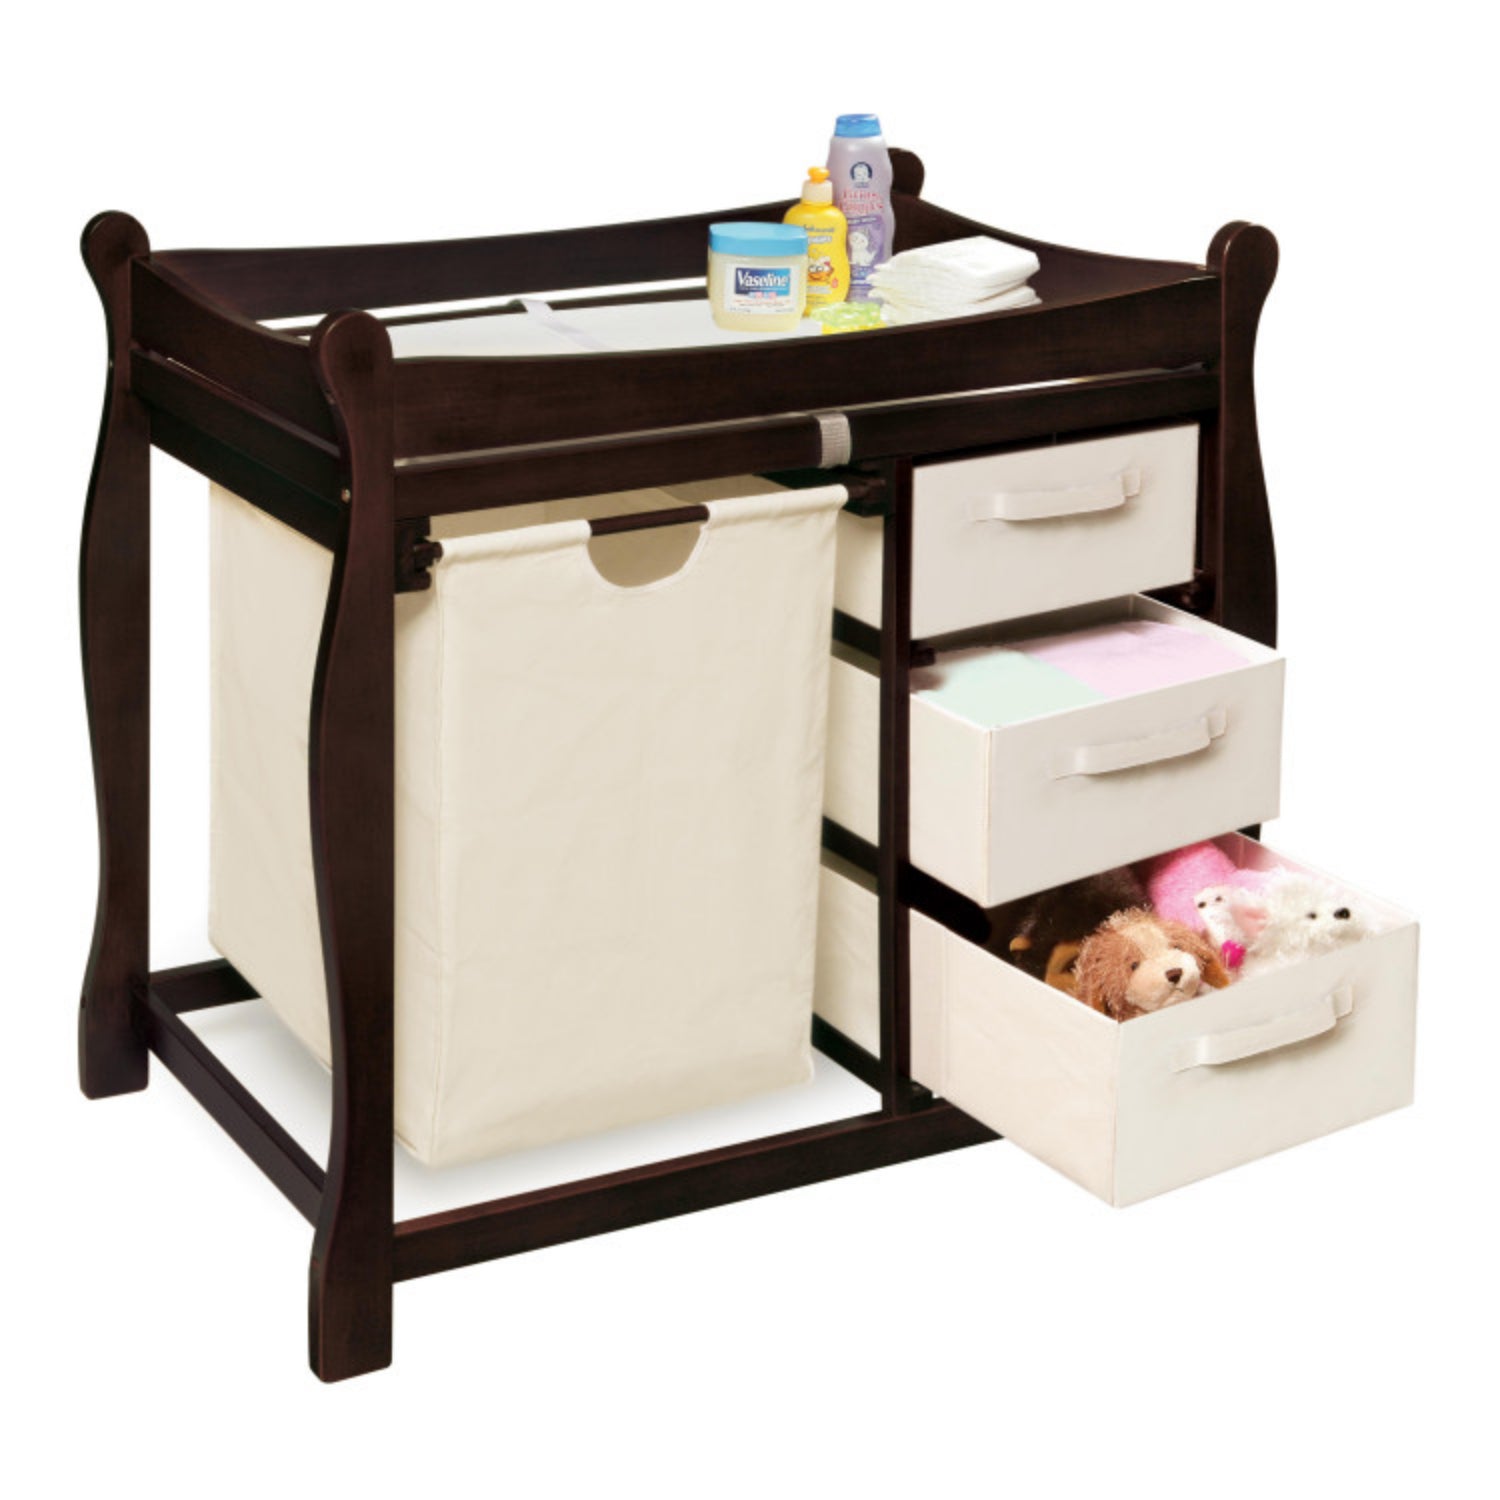 Badger Basket Sleigh Style Baby Changing Table with Hamper and 3 Baskets – Espresso